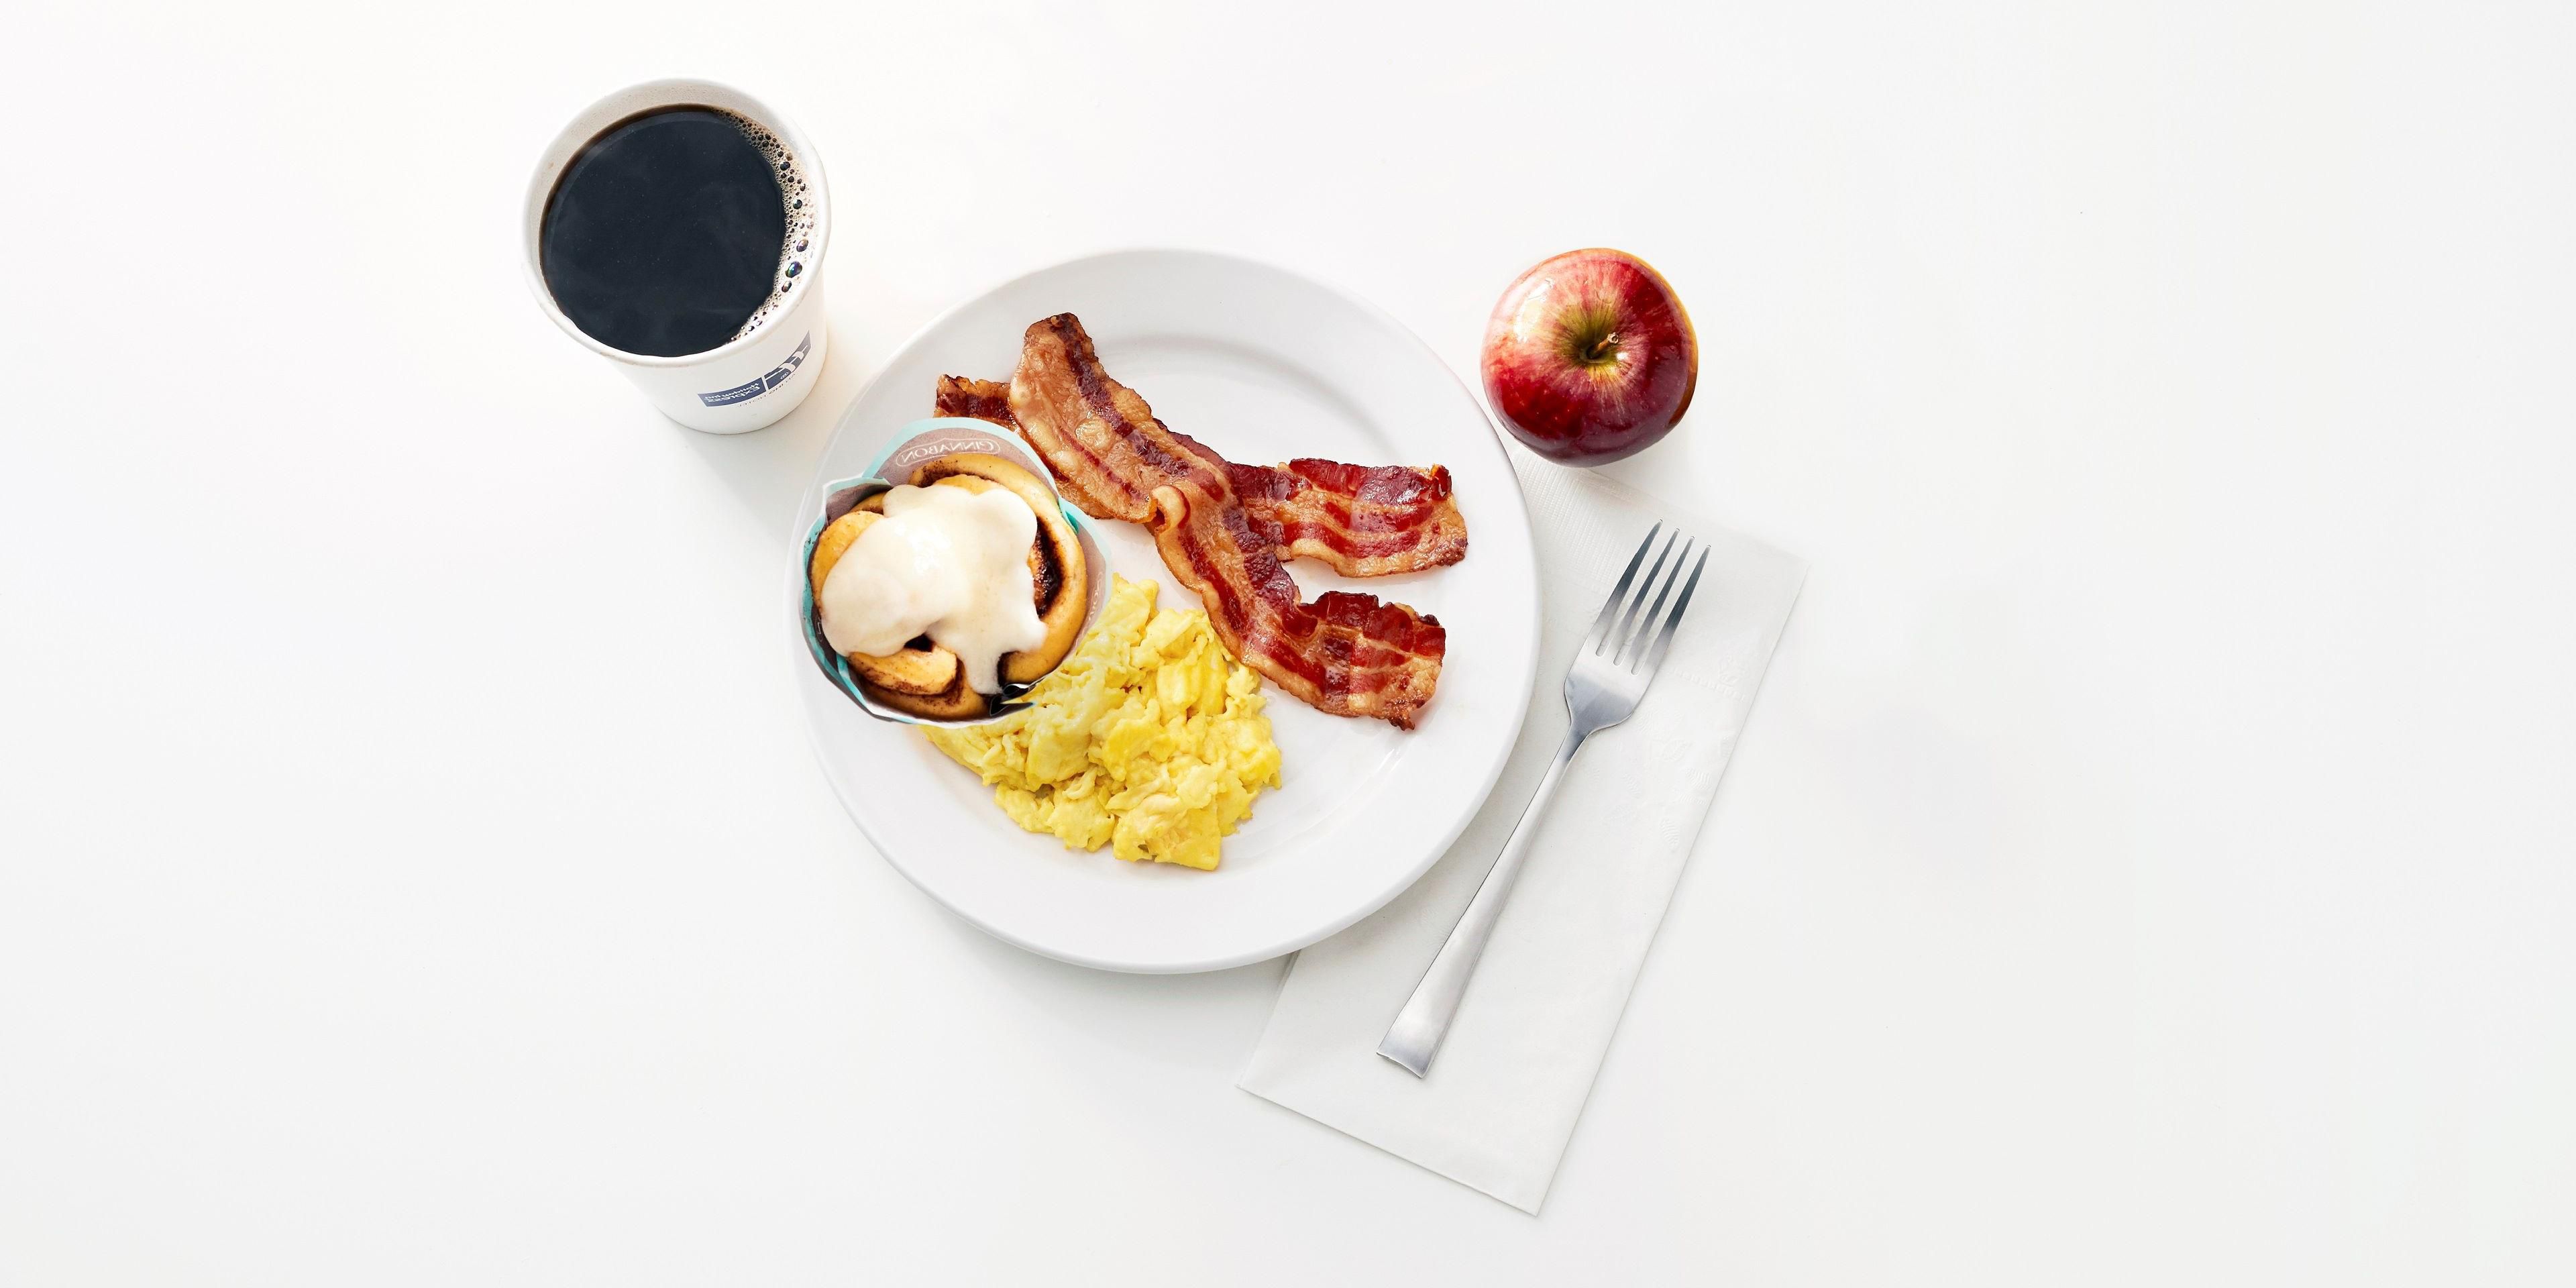 Kick start your day with our free Express Start Breakfast, with grab ‘n’ go options and favorites such as eggs and bacon, hot pancakes, our signature cinnamon rolls and fresh coffee. Offered from 6:00AM to 9:30AM.